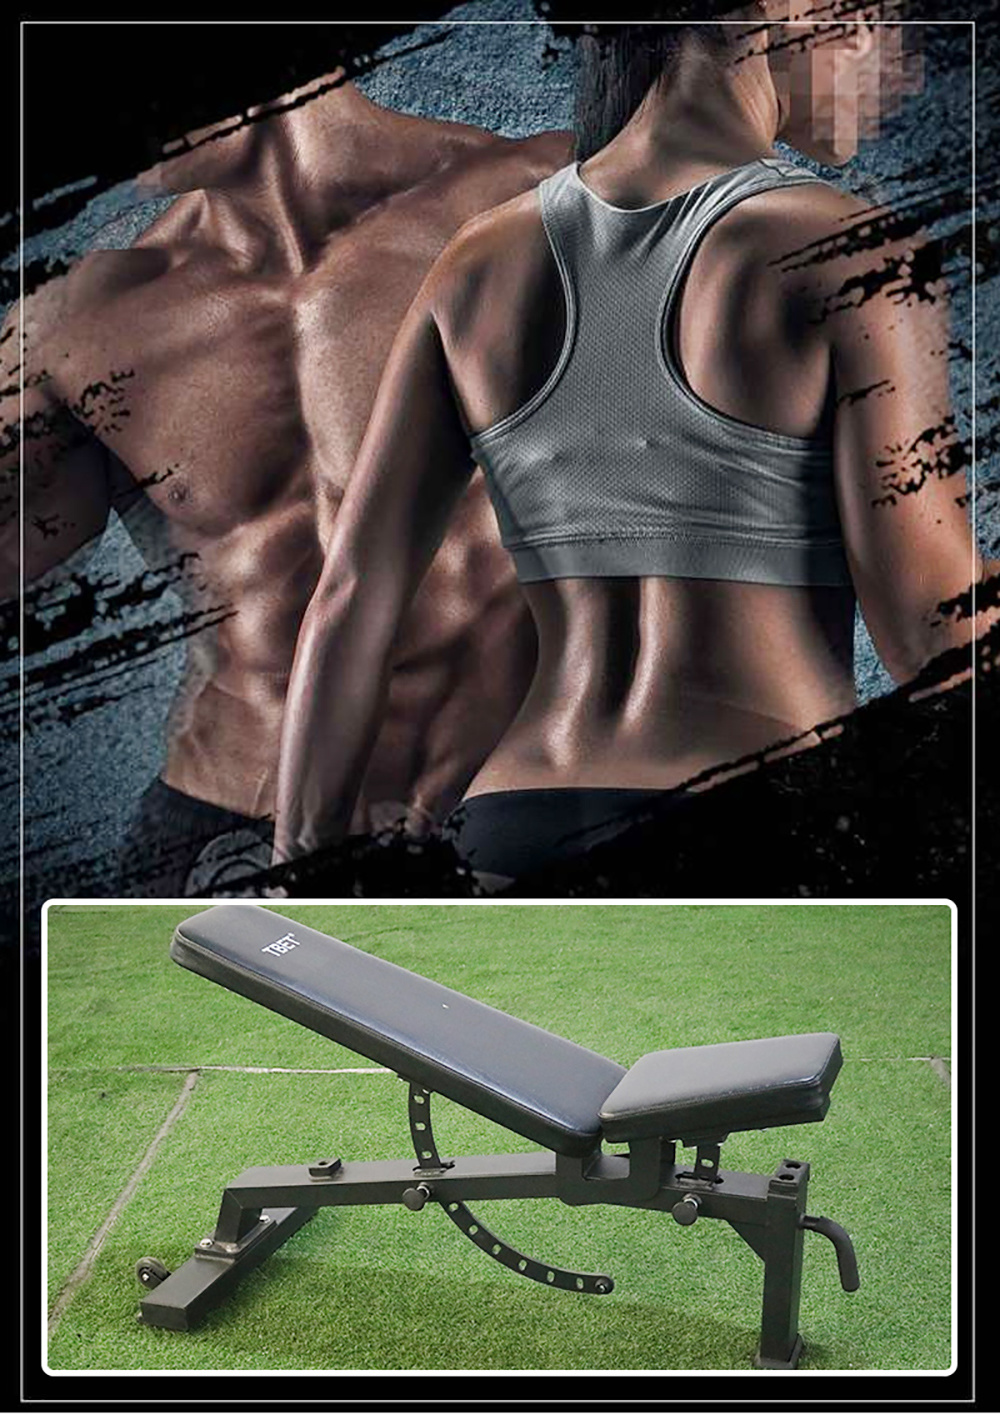 Commercial Gym Training Equipment Fitness Body Workout Weight Bench